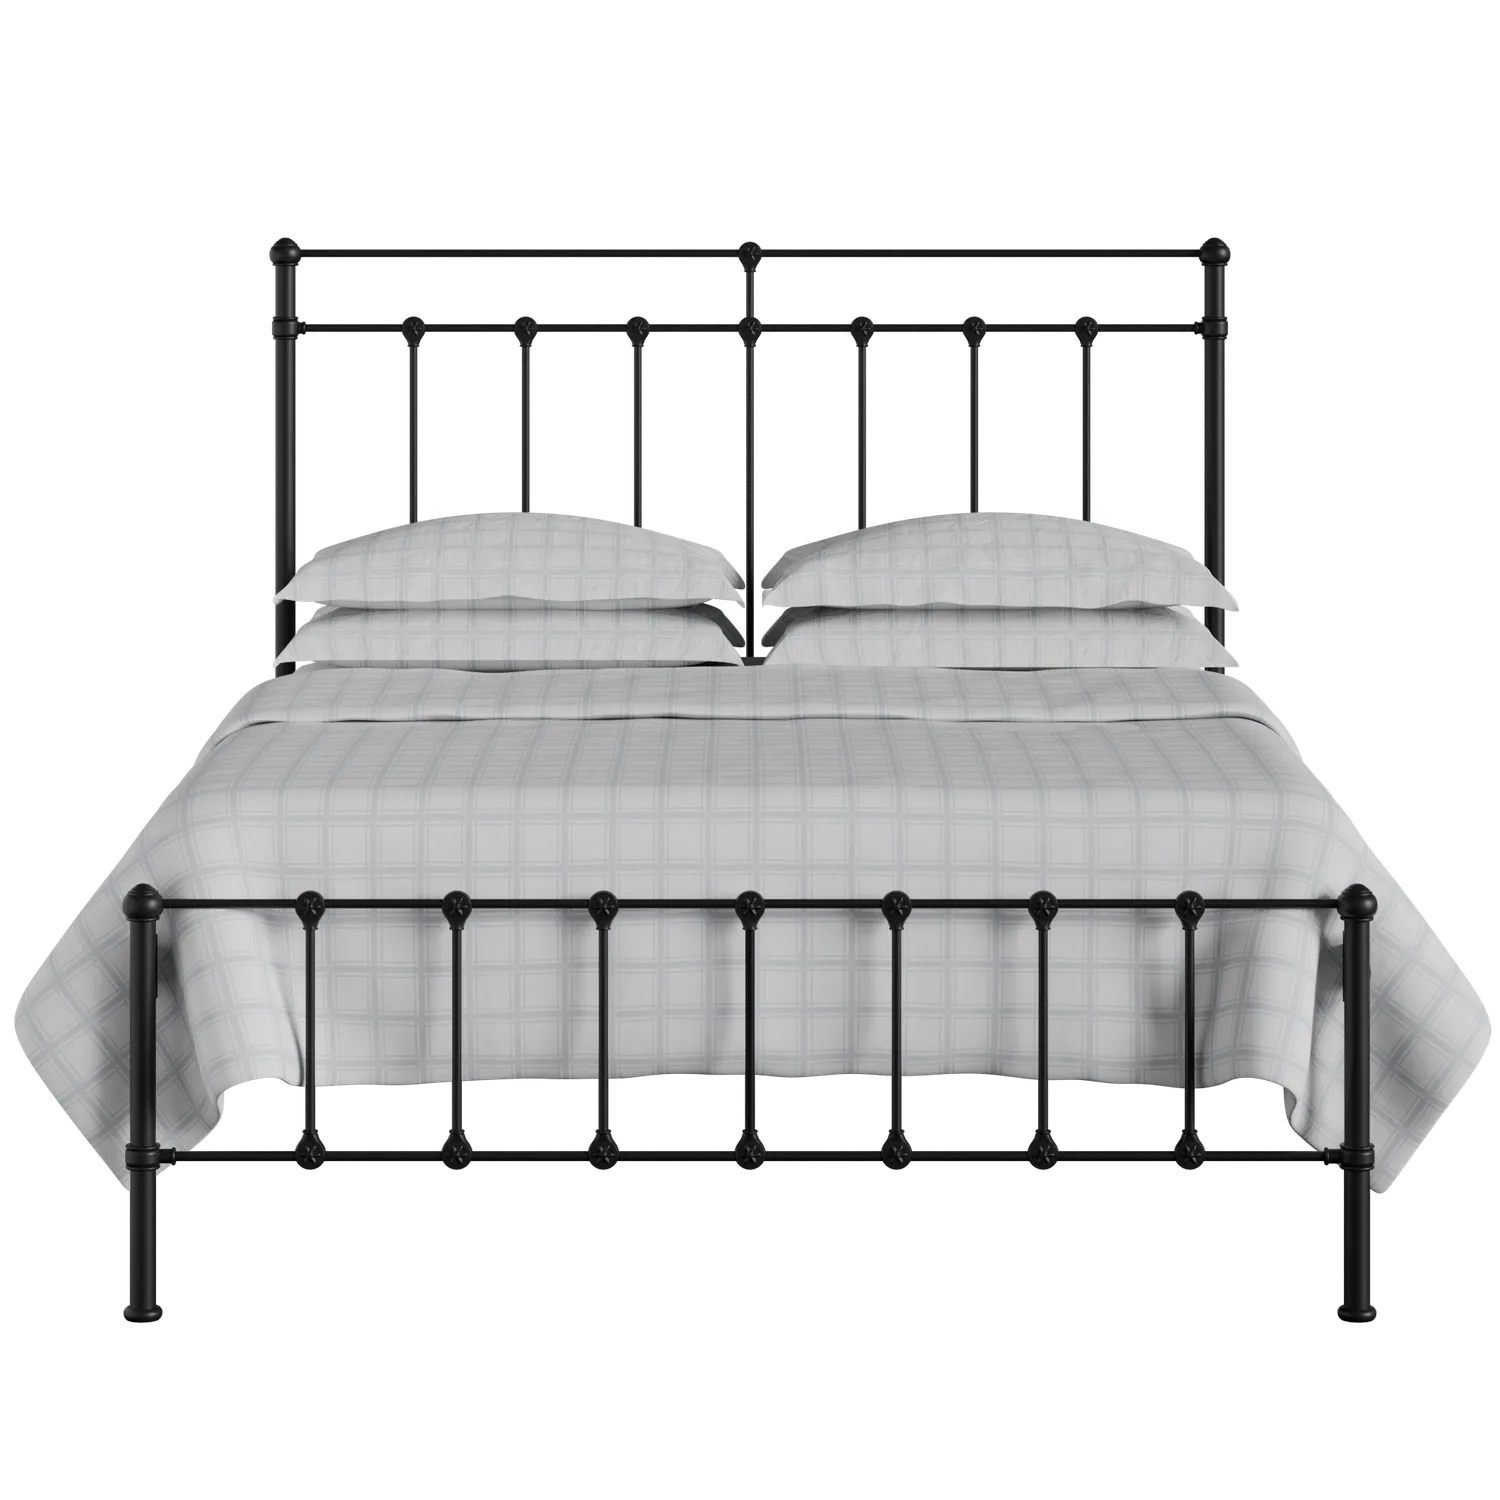 Ashley iron/metal bed in black